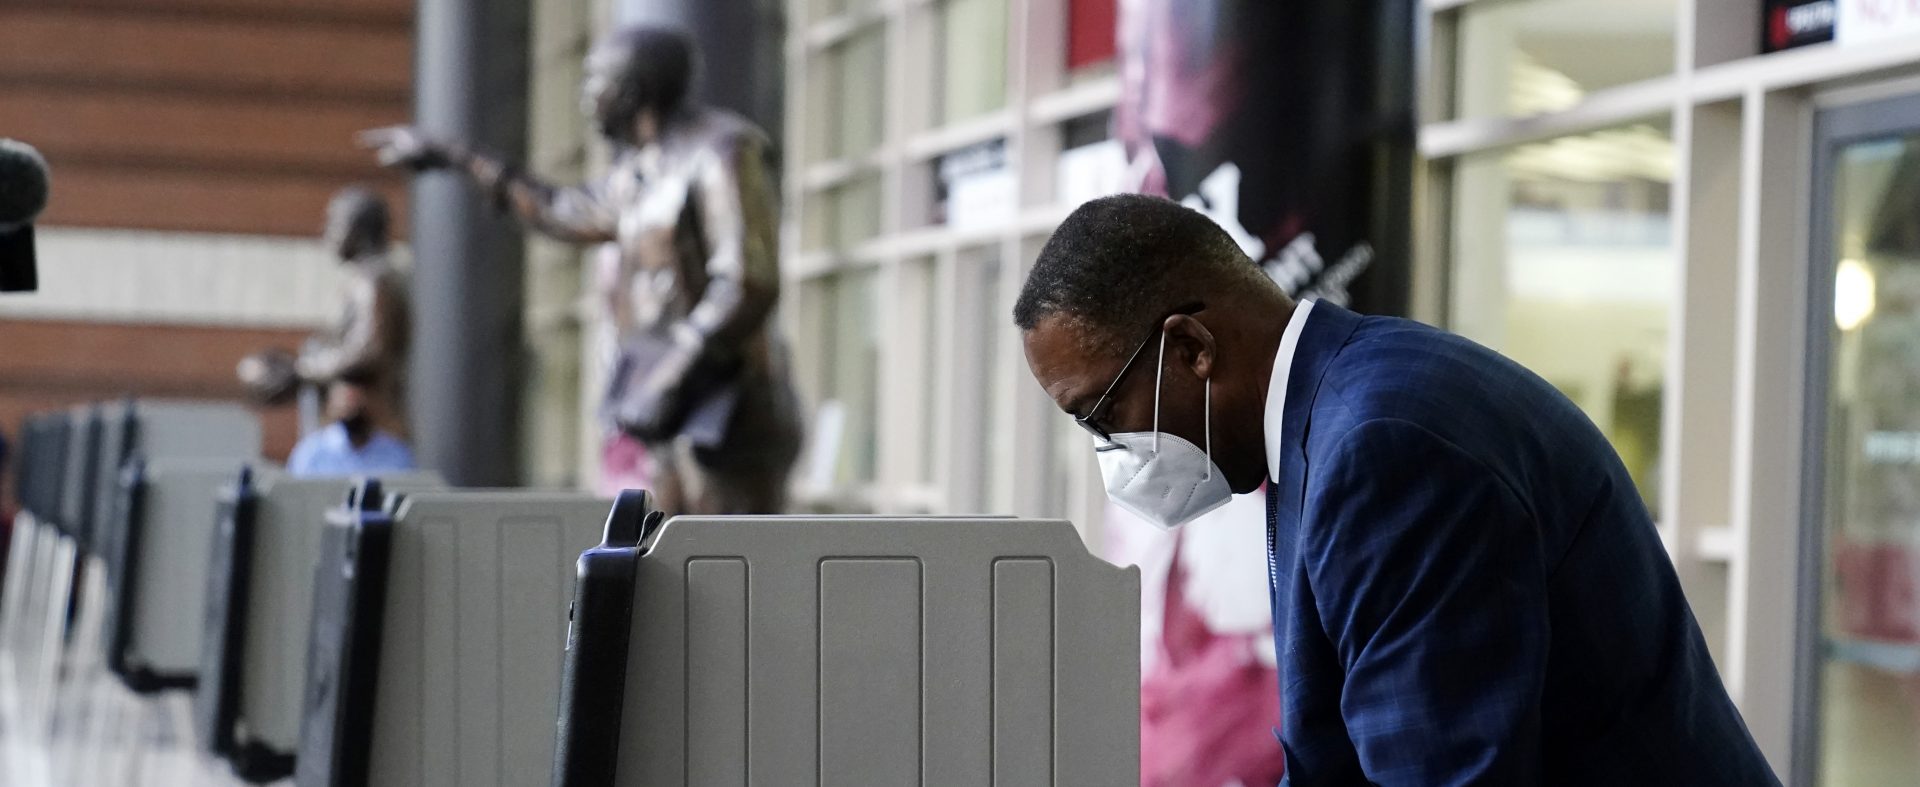 Philadelphia City Council President Darrell L. Clarke fills out his ballot at the opening of a satellite election office at Temple University's Liacouras Center, Tuesday, Sept. 29, 2020, in Philadelphia. P